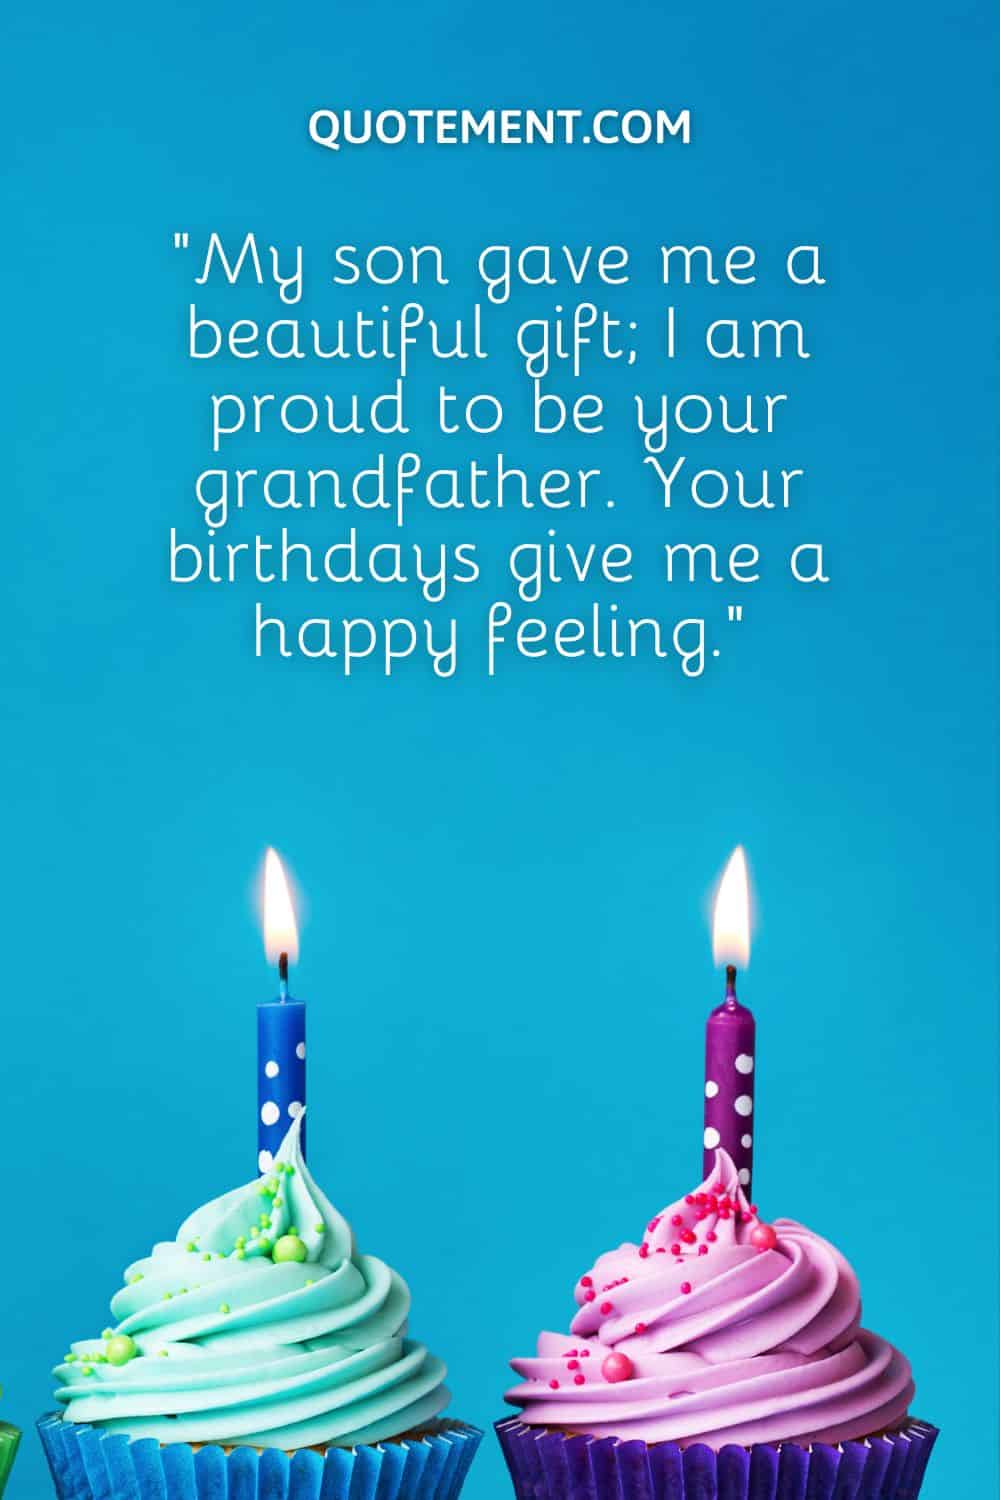 “My son gave me a beautiful gift; I am proud to be your grandfather. Your birthdays give me a happy feeling.”